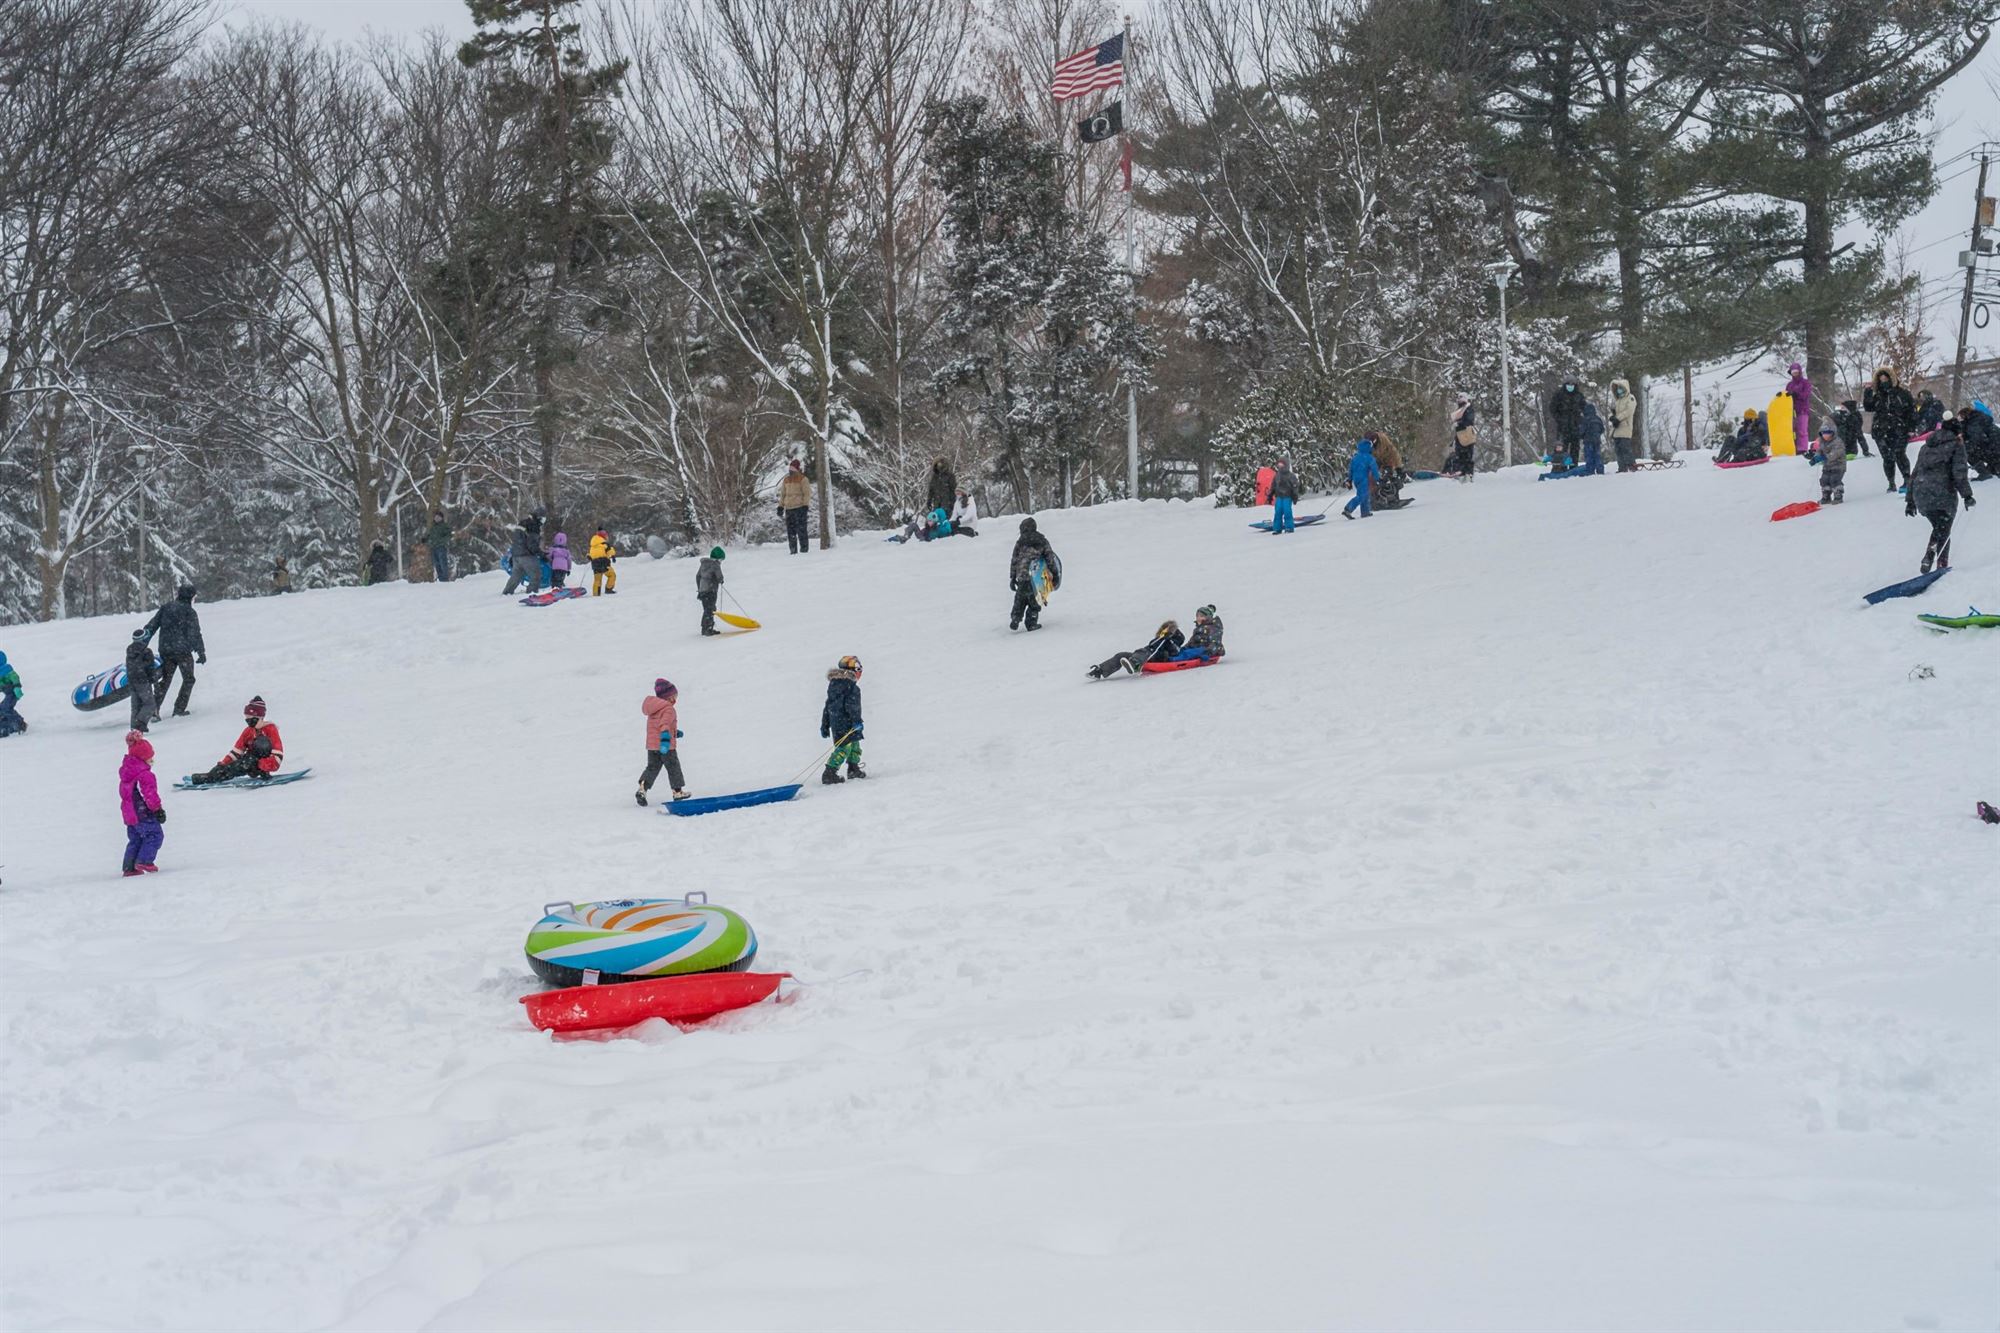 Sledders on a hill